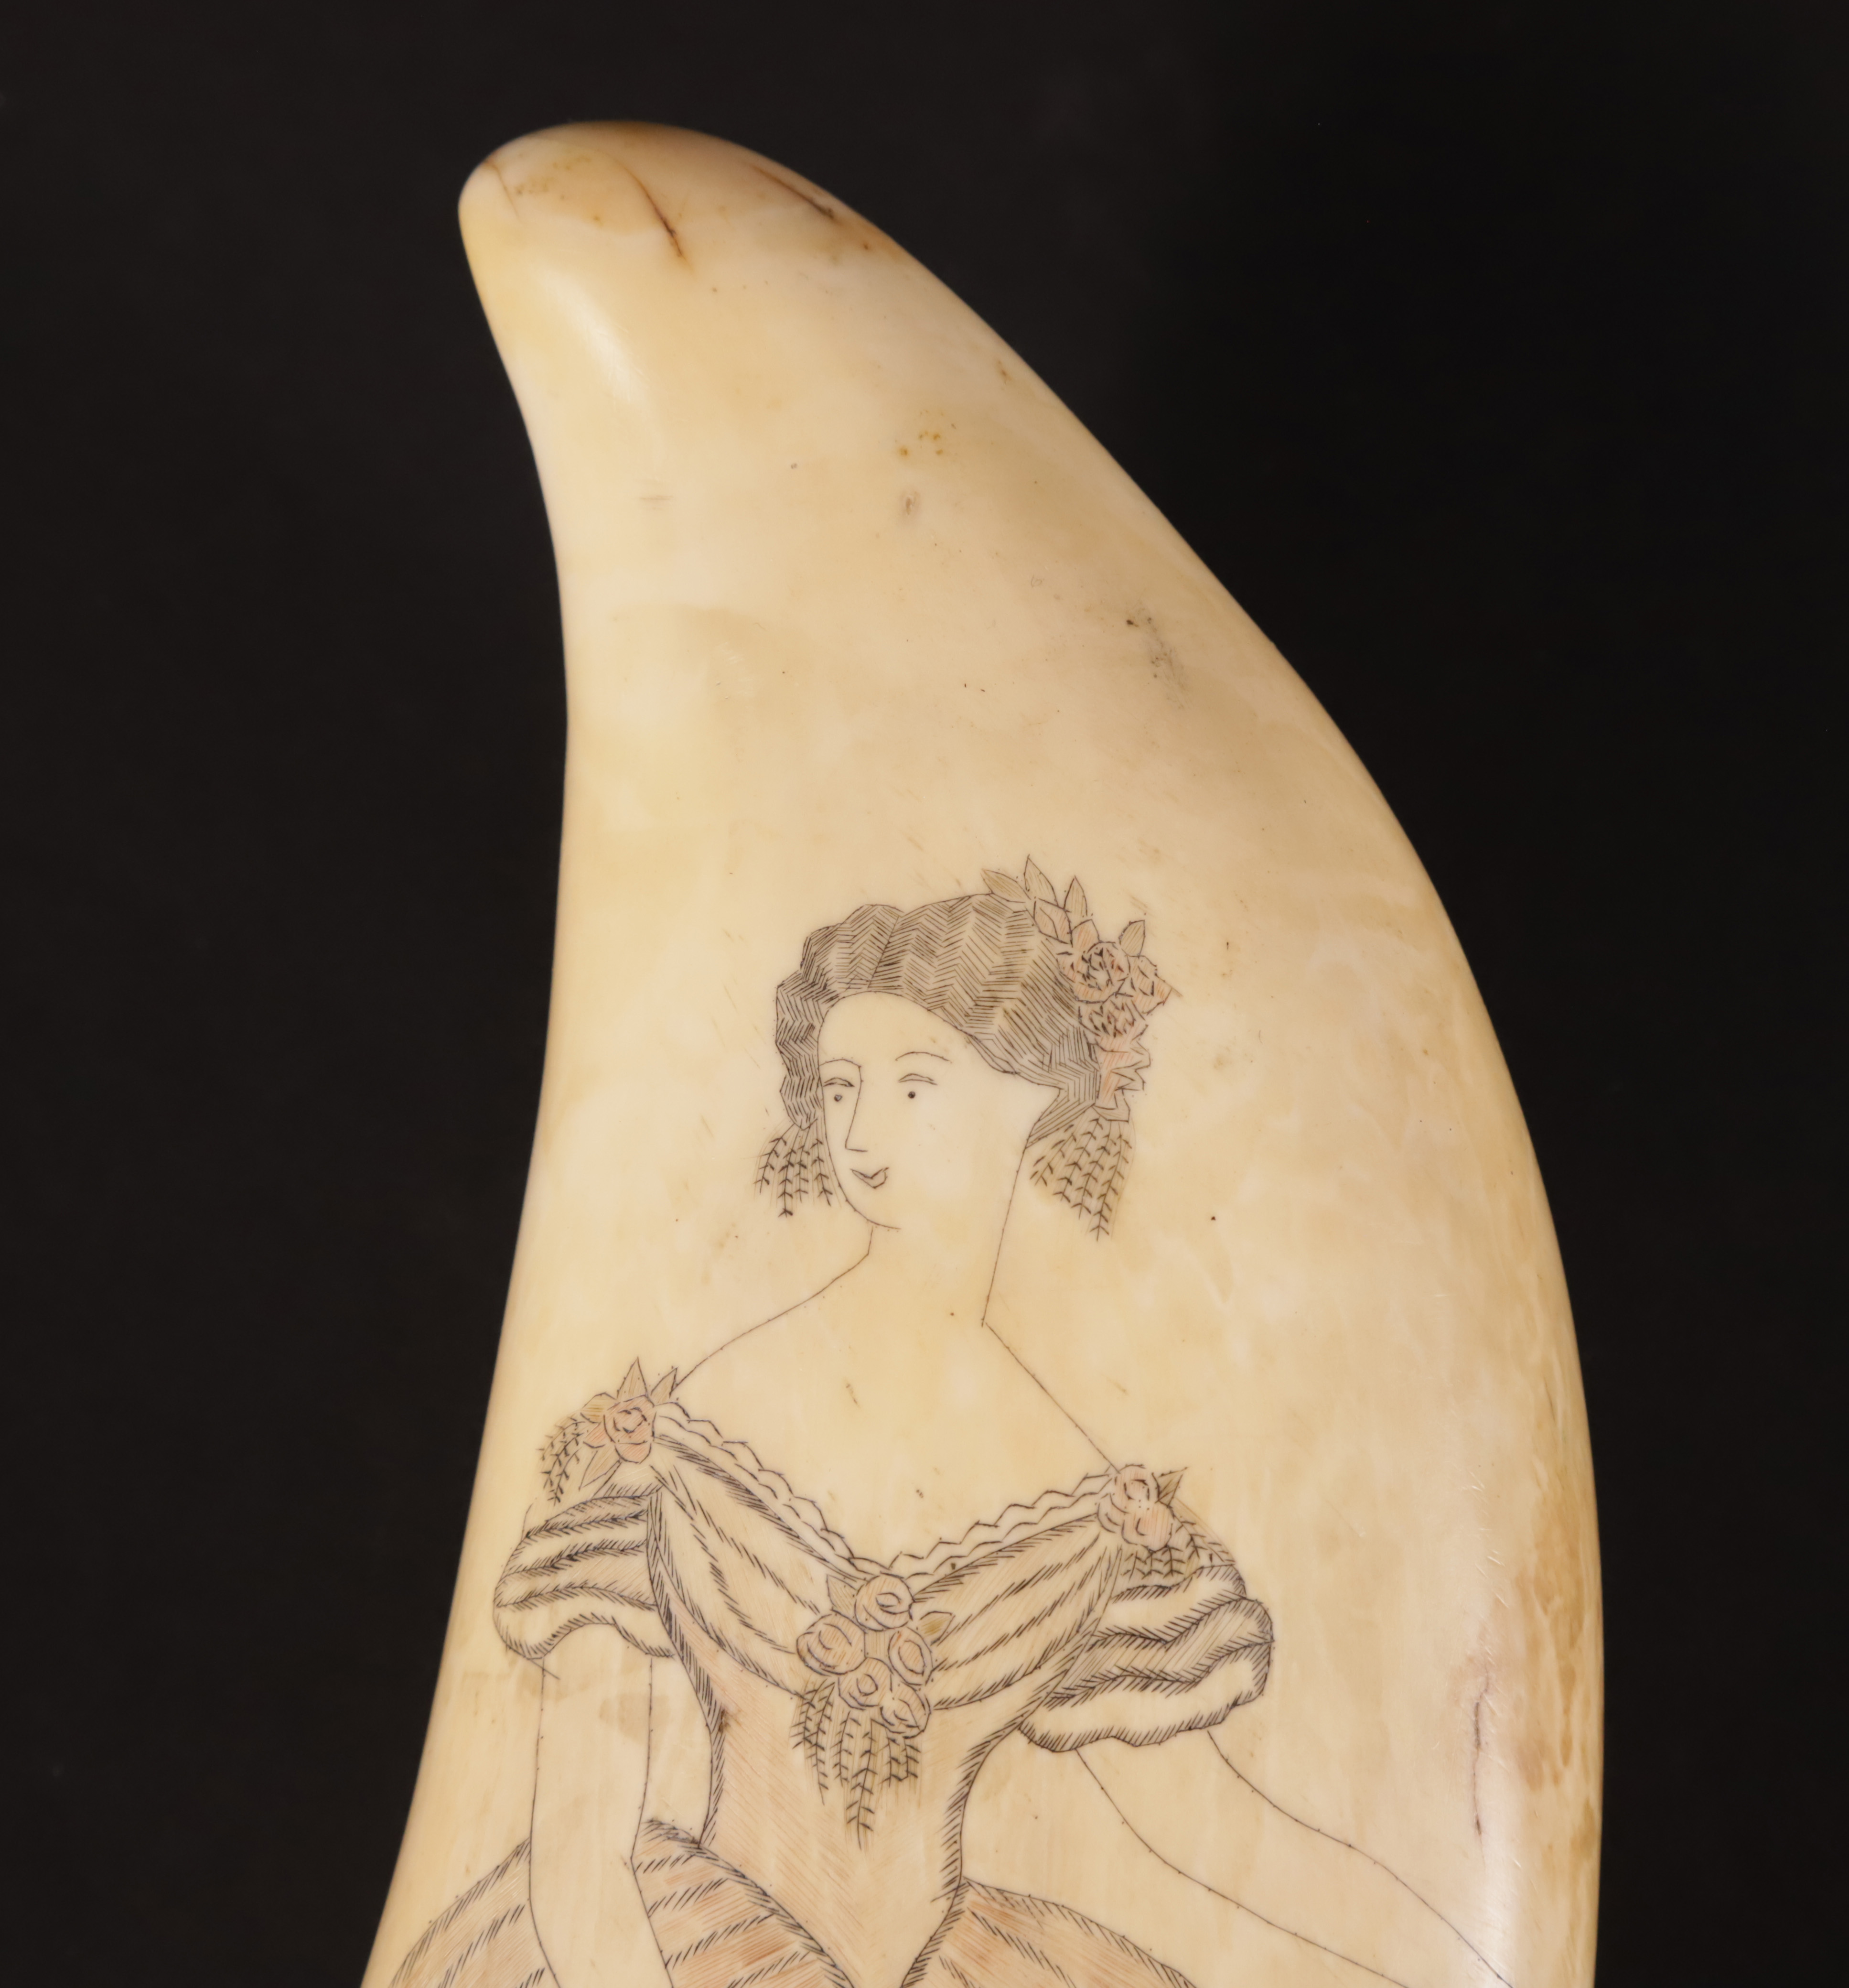 Scrimshawed and Polychromed Antique Sperm Whale Tooth, 19th Century